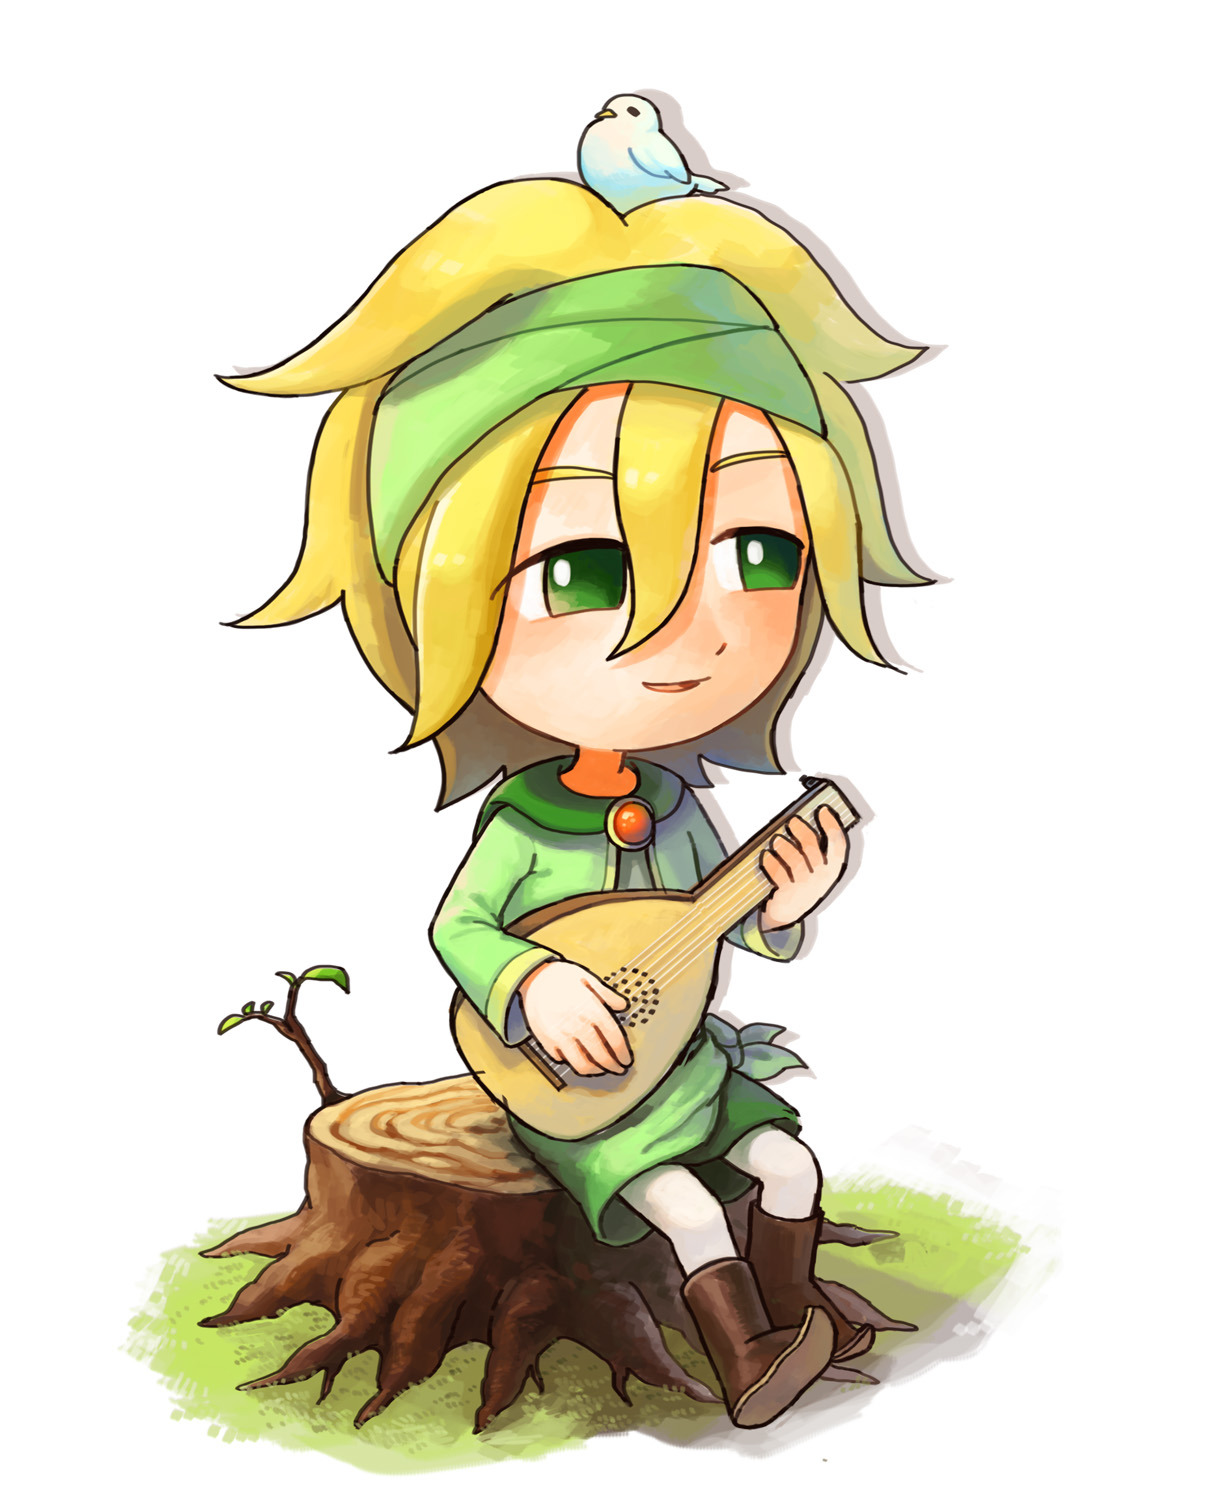 Gilbert is the second BACHELOR we’re revealing for Harvest Moon: The Lost Valley.  A travelling bard, Gilbert has a unique speech pattern among the residents this time – this eligible gentleman speaks in rhyme! “I am called Gilbert, my friend. Farewell until we meet again.”Gilbert’s knowledge is deep and wide; his knowledge of history and lore will be an asset by your side.  Humble and gentle to a fault, yet Gilbert’s heart is locked inside the tightest of vaults.  He&#8217;ll teach you the art of fishing when he arrives; it&#8217;s a necessary skill for long winters you must survive! His knowledge of the Harvest Goddess is important to your task, and his wit is as sharp as your favorite axe.“I&#8217;ve been seeking somewhere to plant seeds, the perfect spot for their growing needs.&#8221;Gilbert is a wanderer at heart, traveling from place to place. However, it seems there is a specific reason he has come to visit the Lost Valley. Do you have what it takes to get Gilbert to open up to you about why he really came here, and also convince him to plant his roots firmly in the Lost Valley?